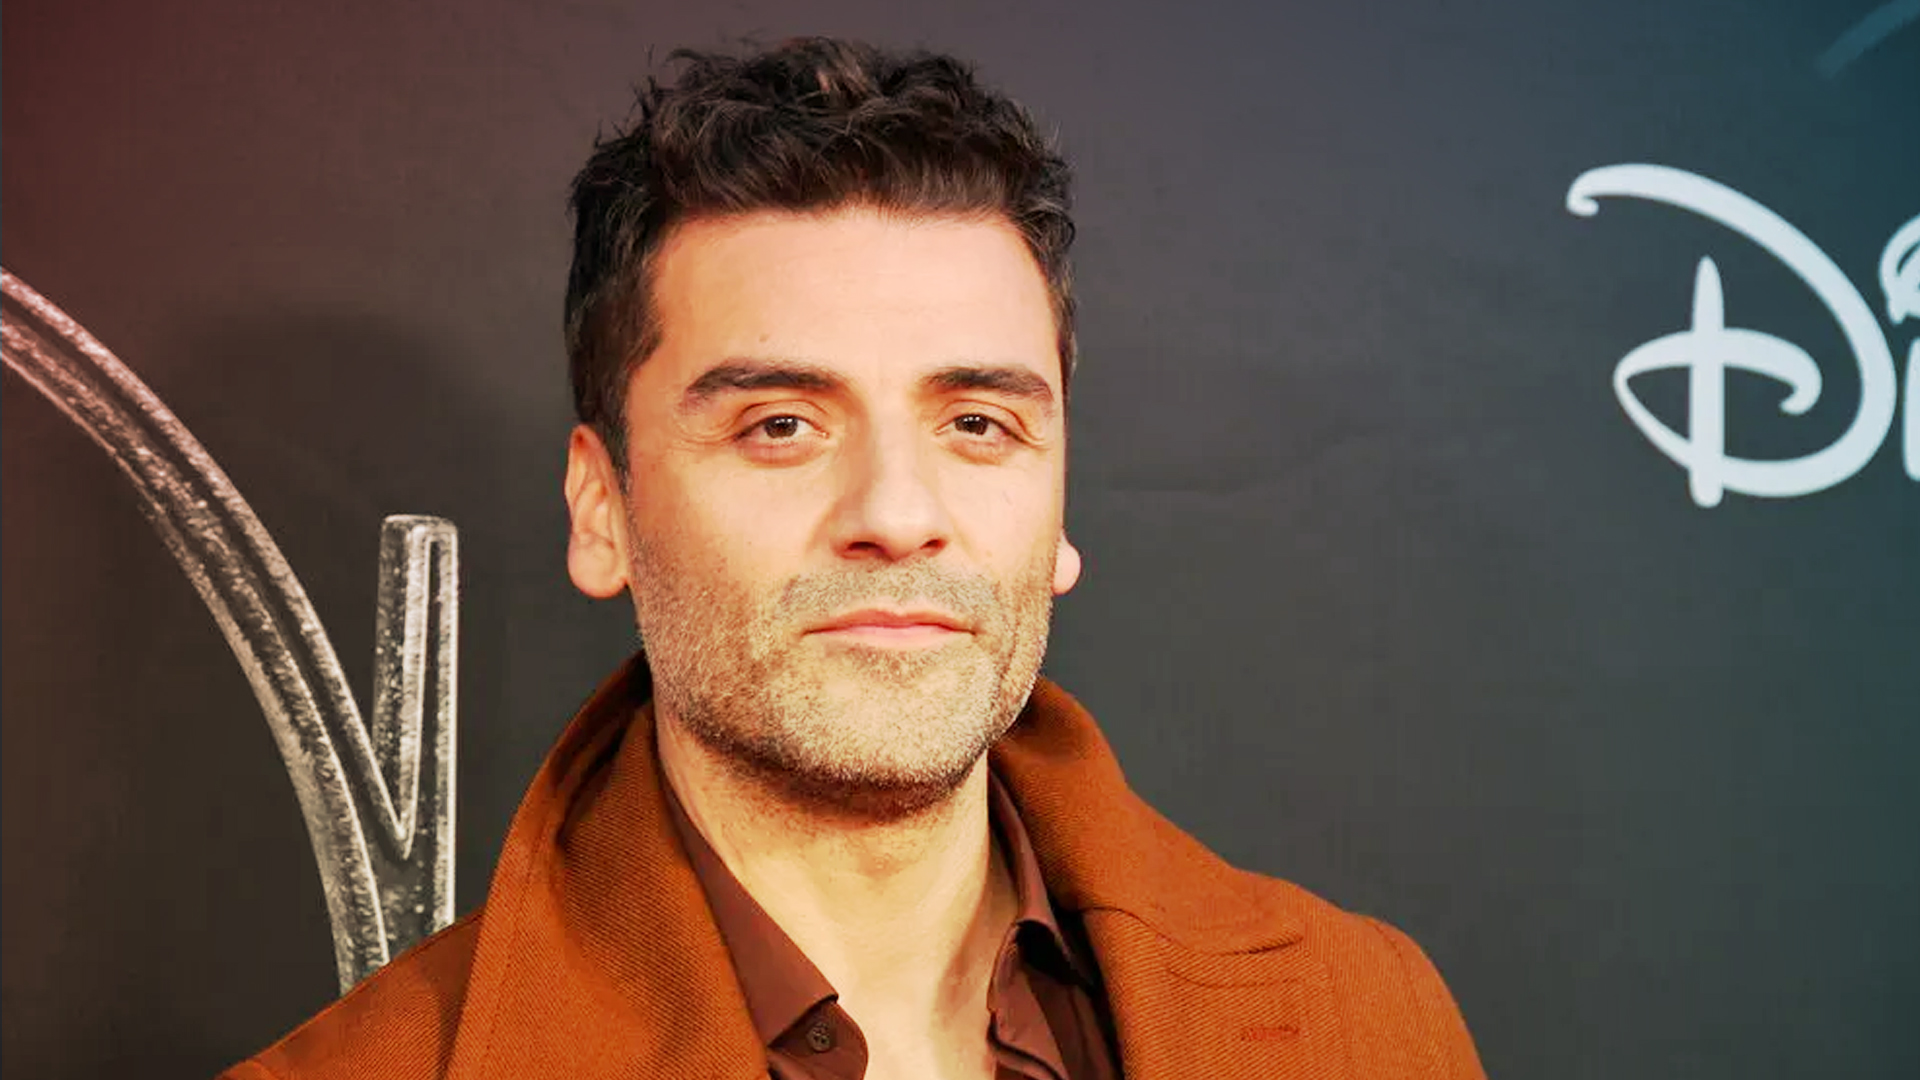 How Many Siblings Does Oscar Isaac Have?